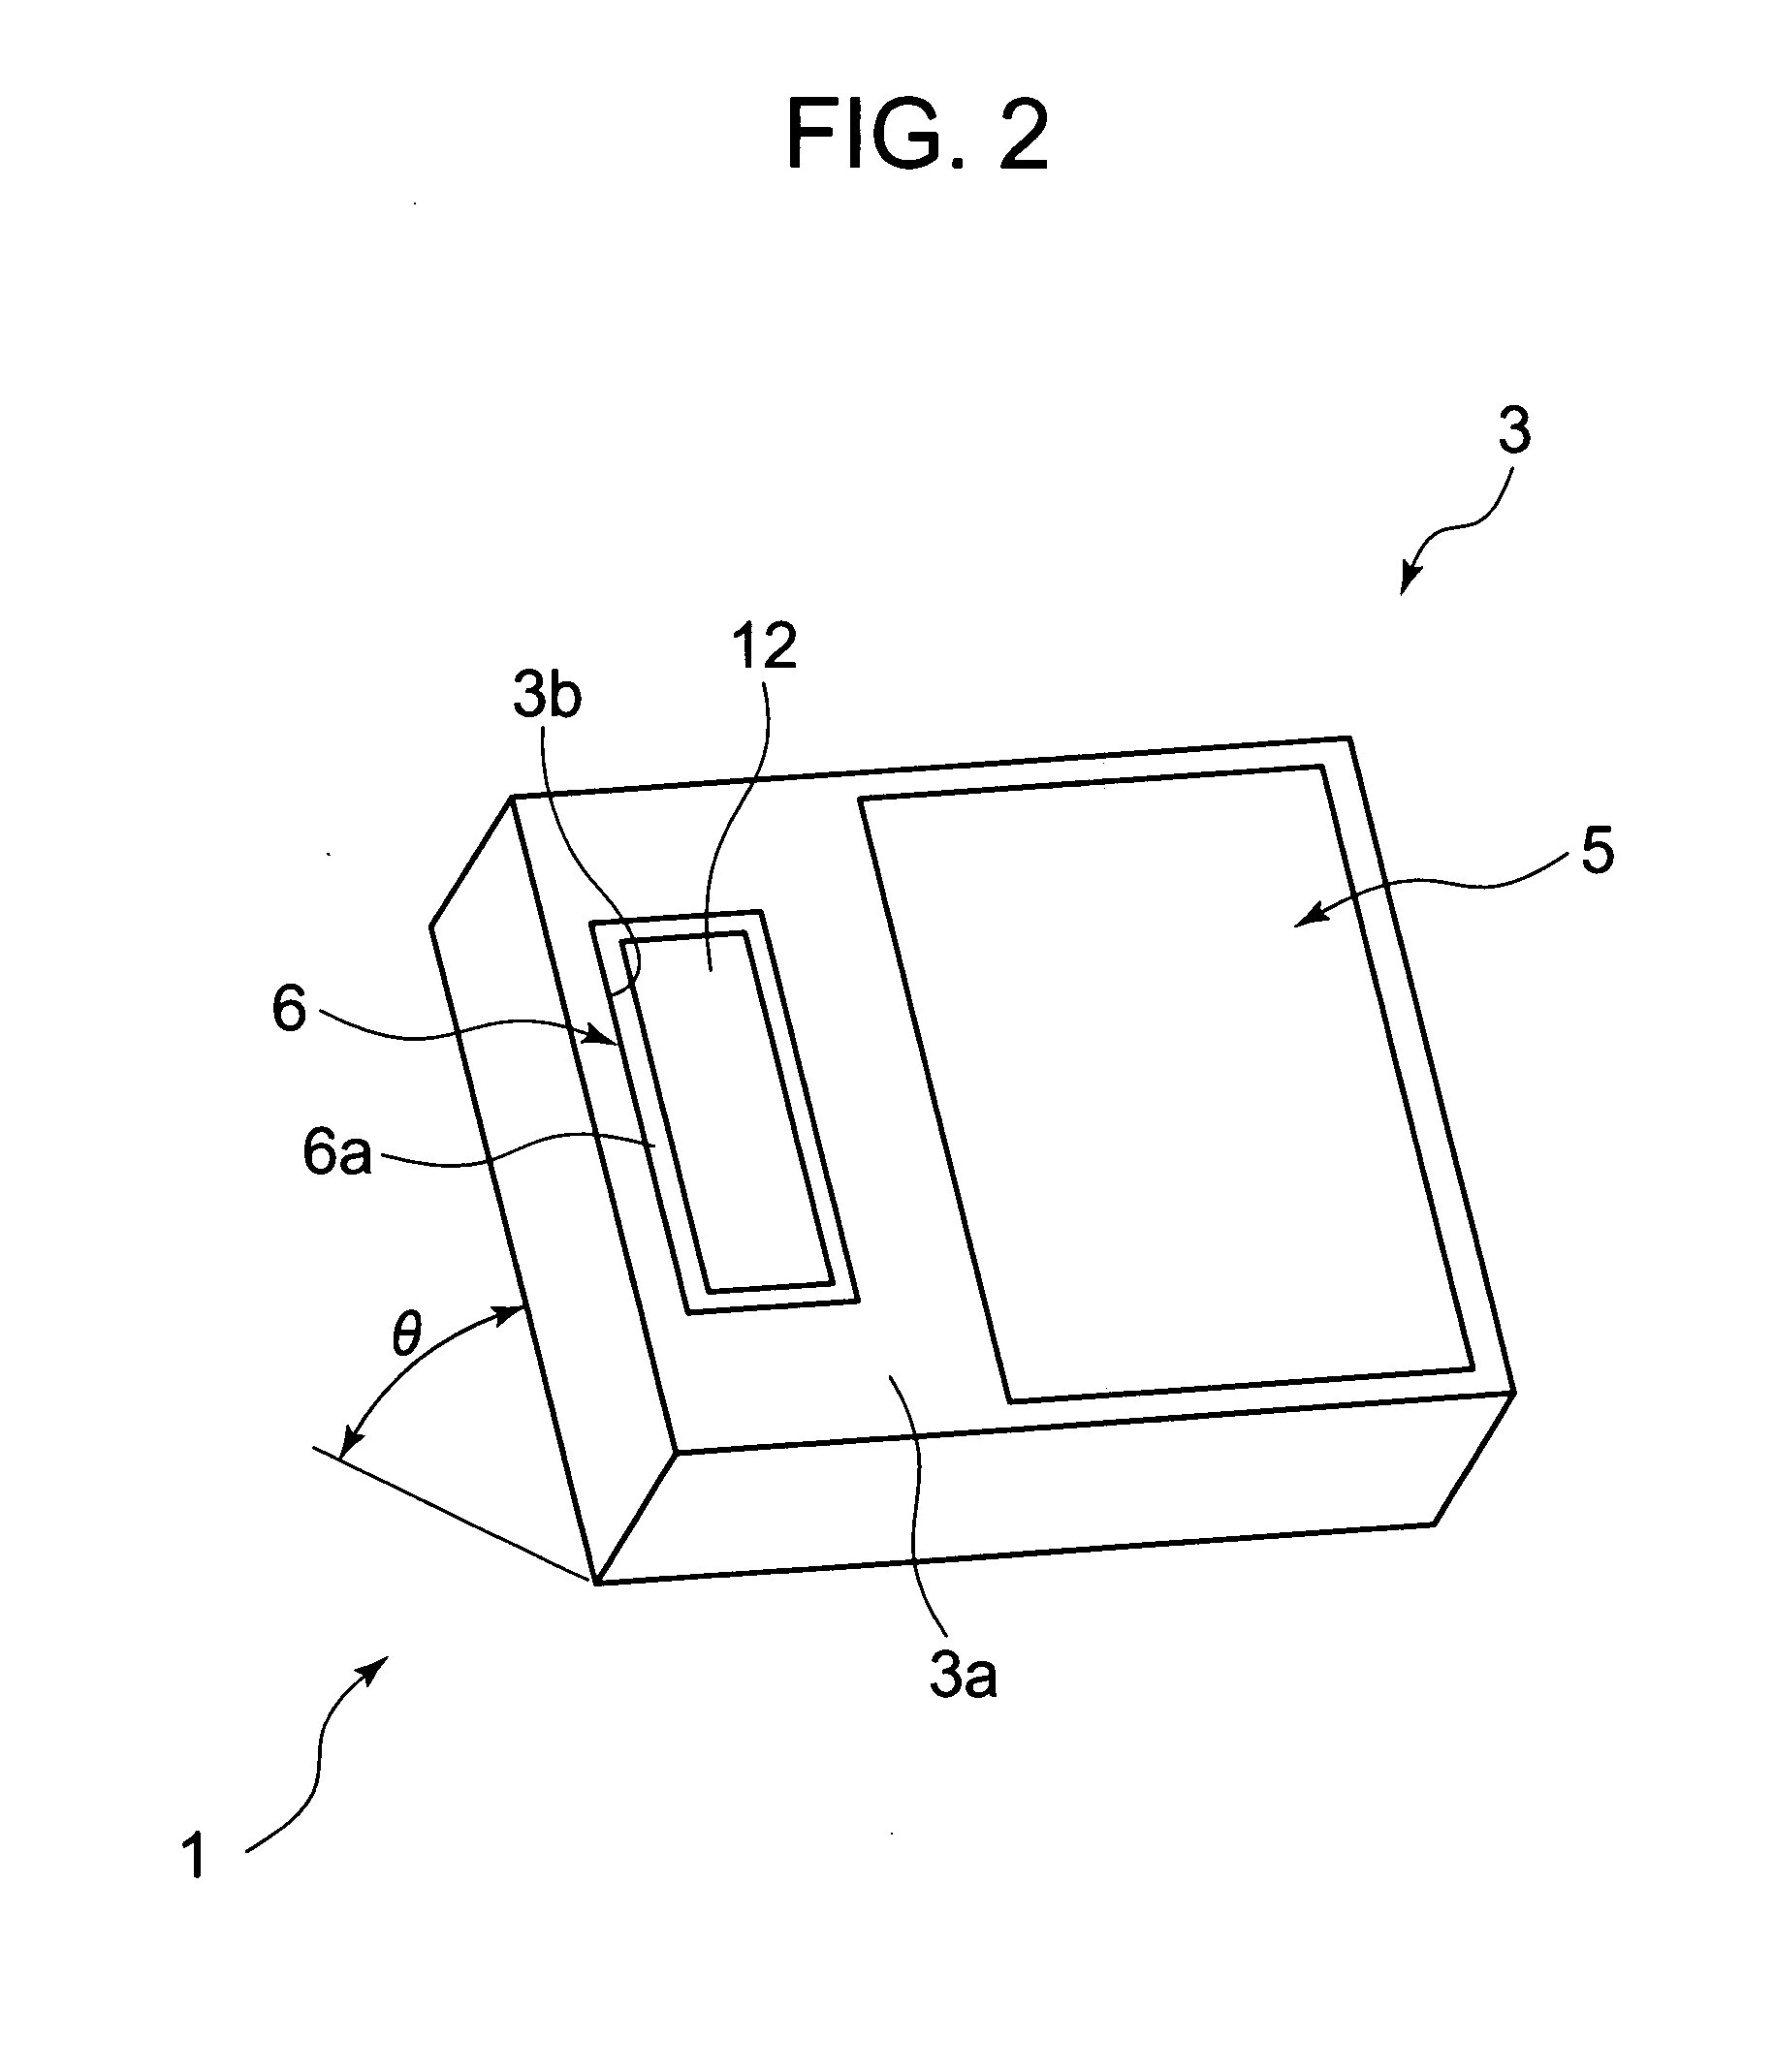 Sheet retaining structure and printer for an electronic voting device